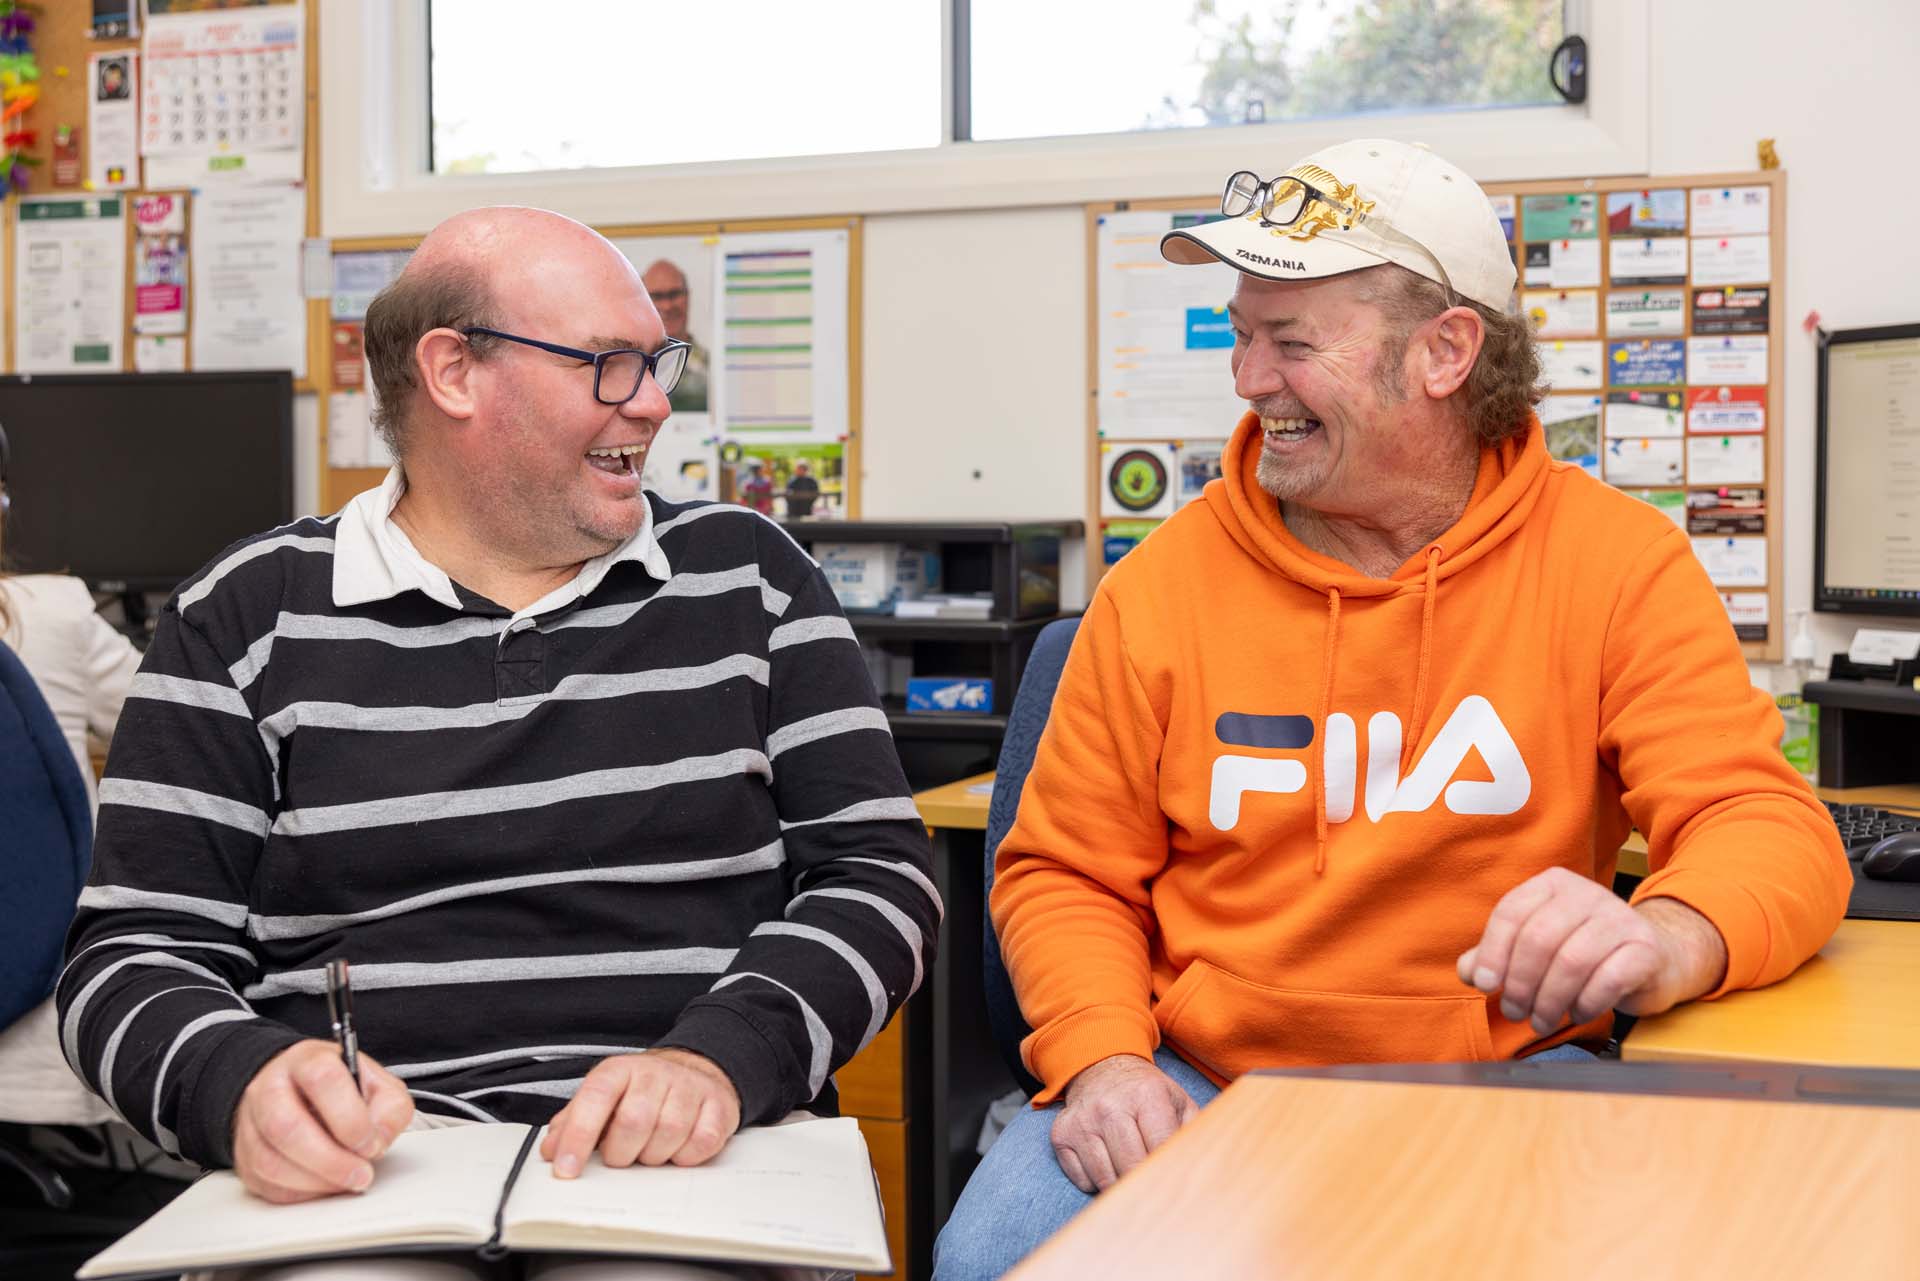 NDIS participant learns new skills on the job with support worker